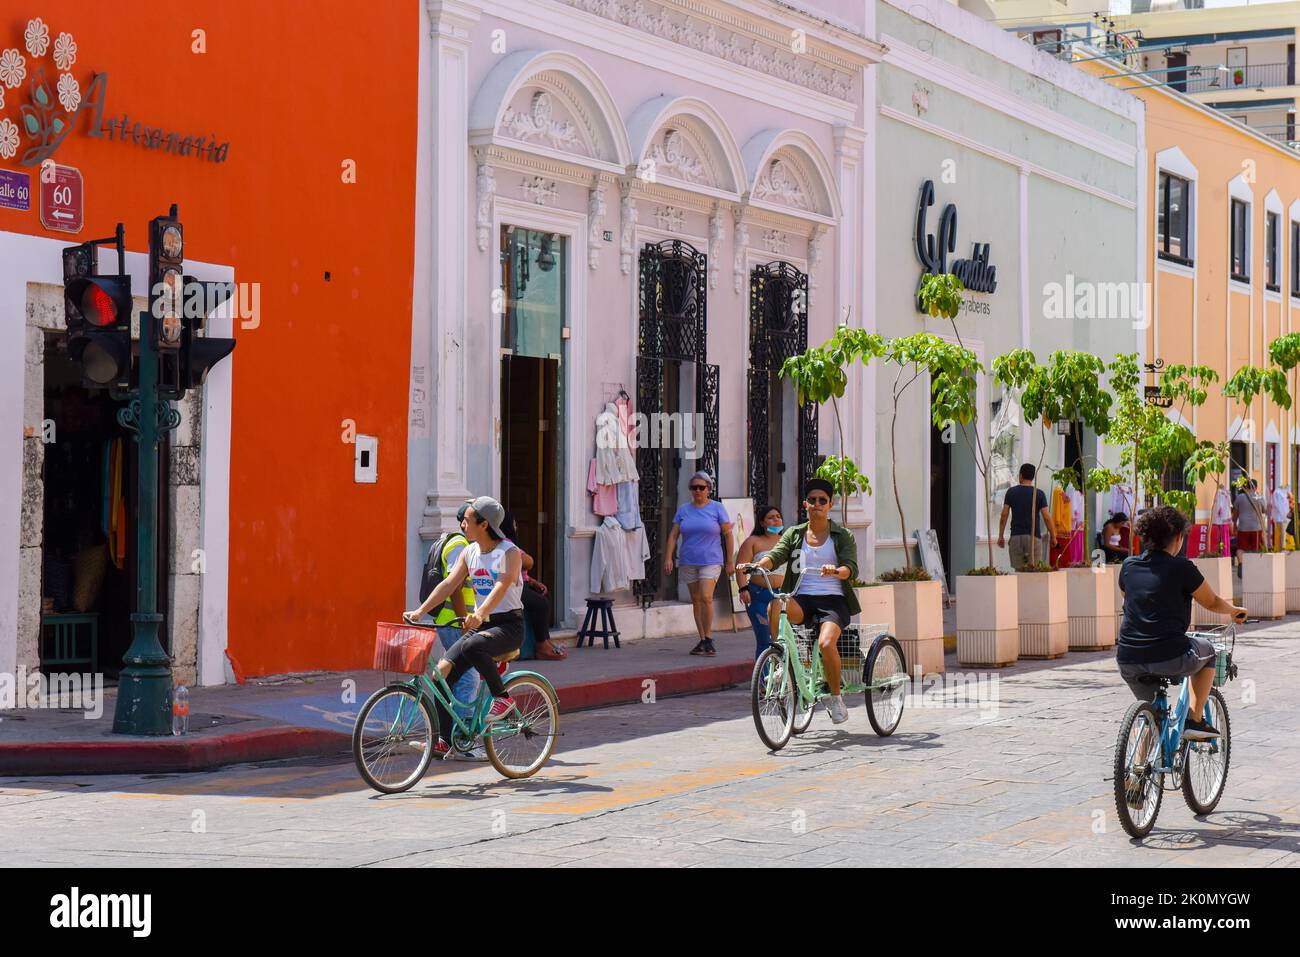 Biciruta is a Sunday traditional community bike ride event where the city closes some streets in the historical center to allow people to ride bicycles and enjoy outdoor activities, Merida, Yucatan, Mexico Stock Photo